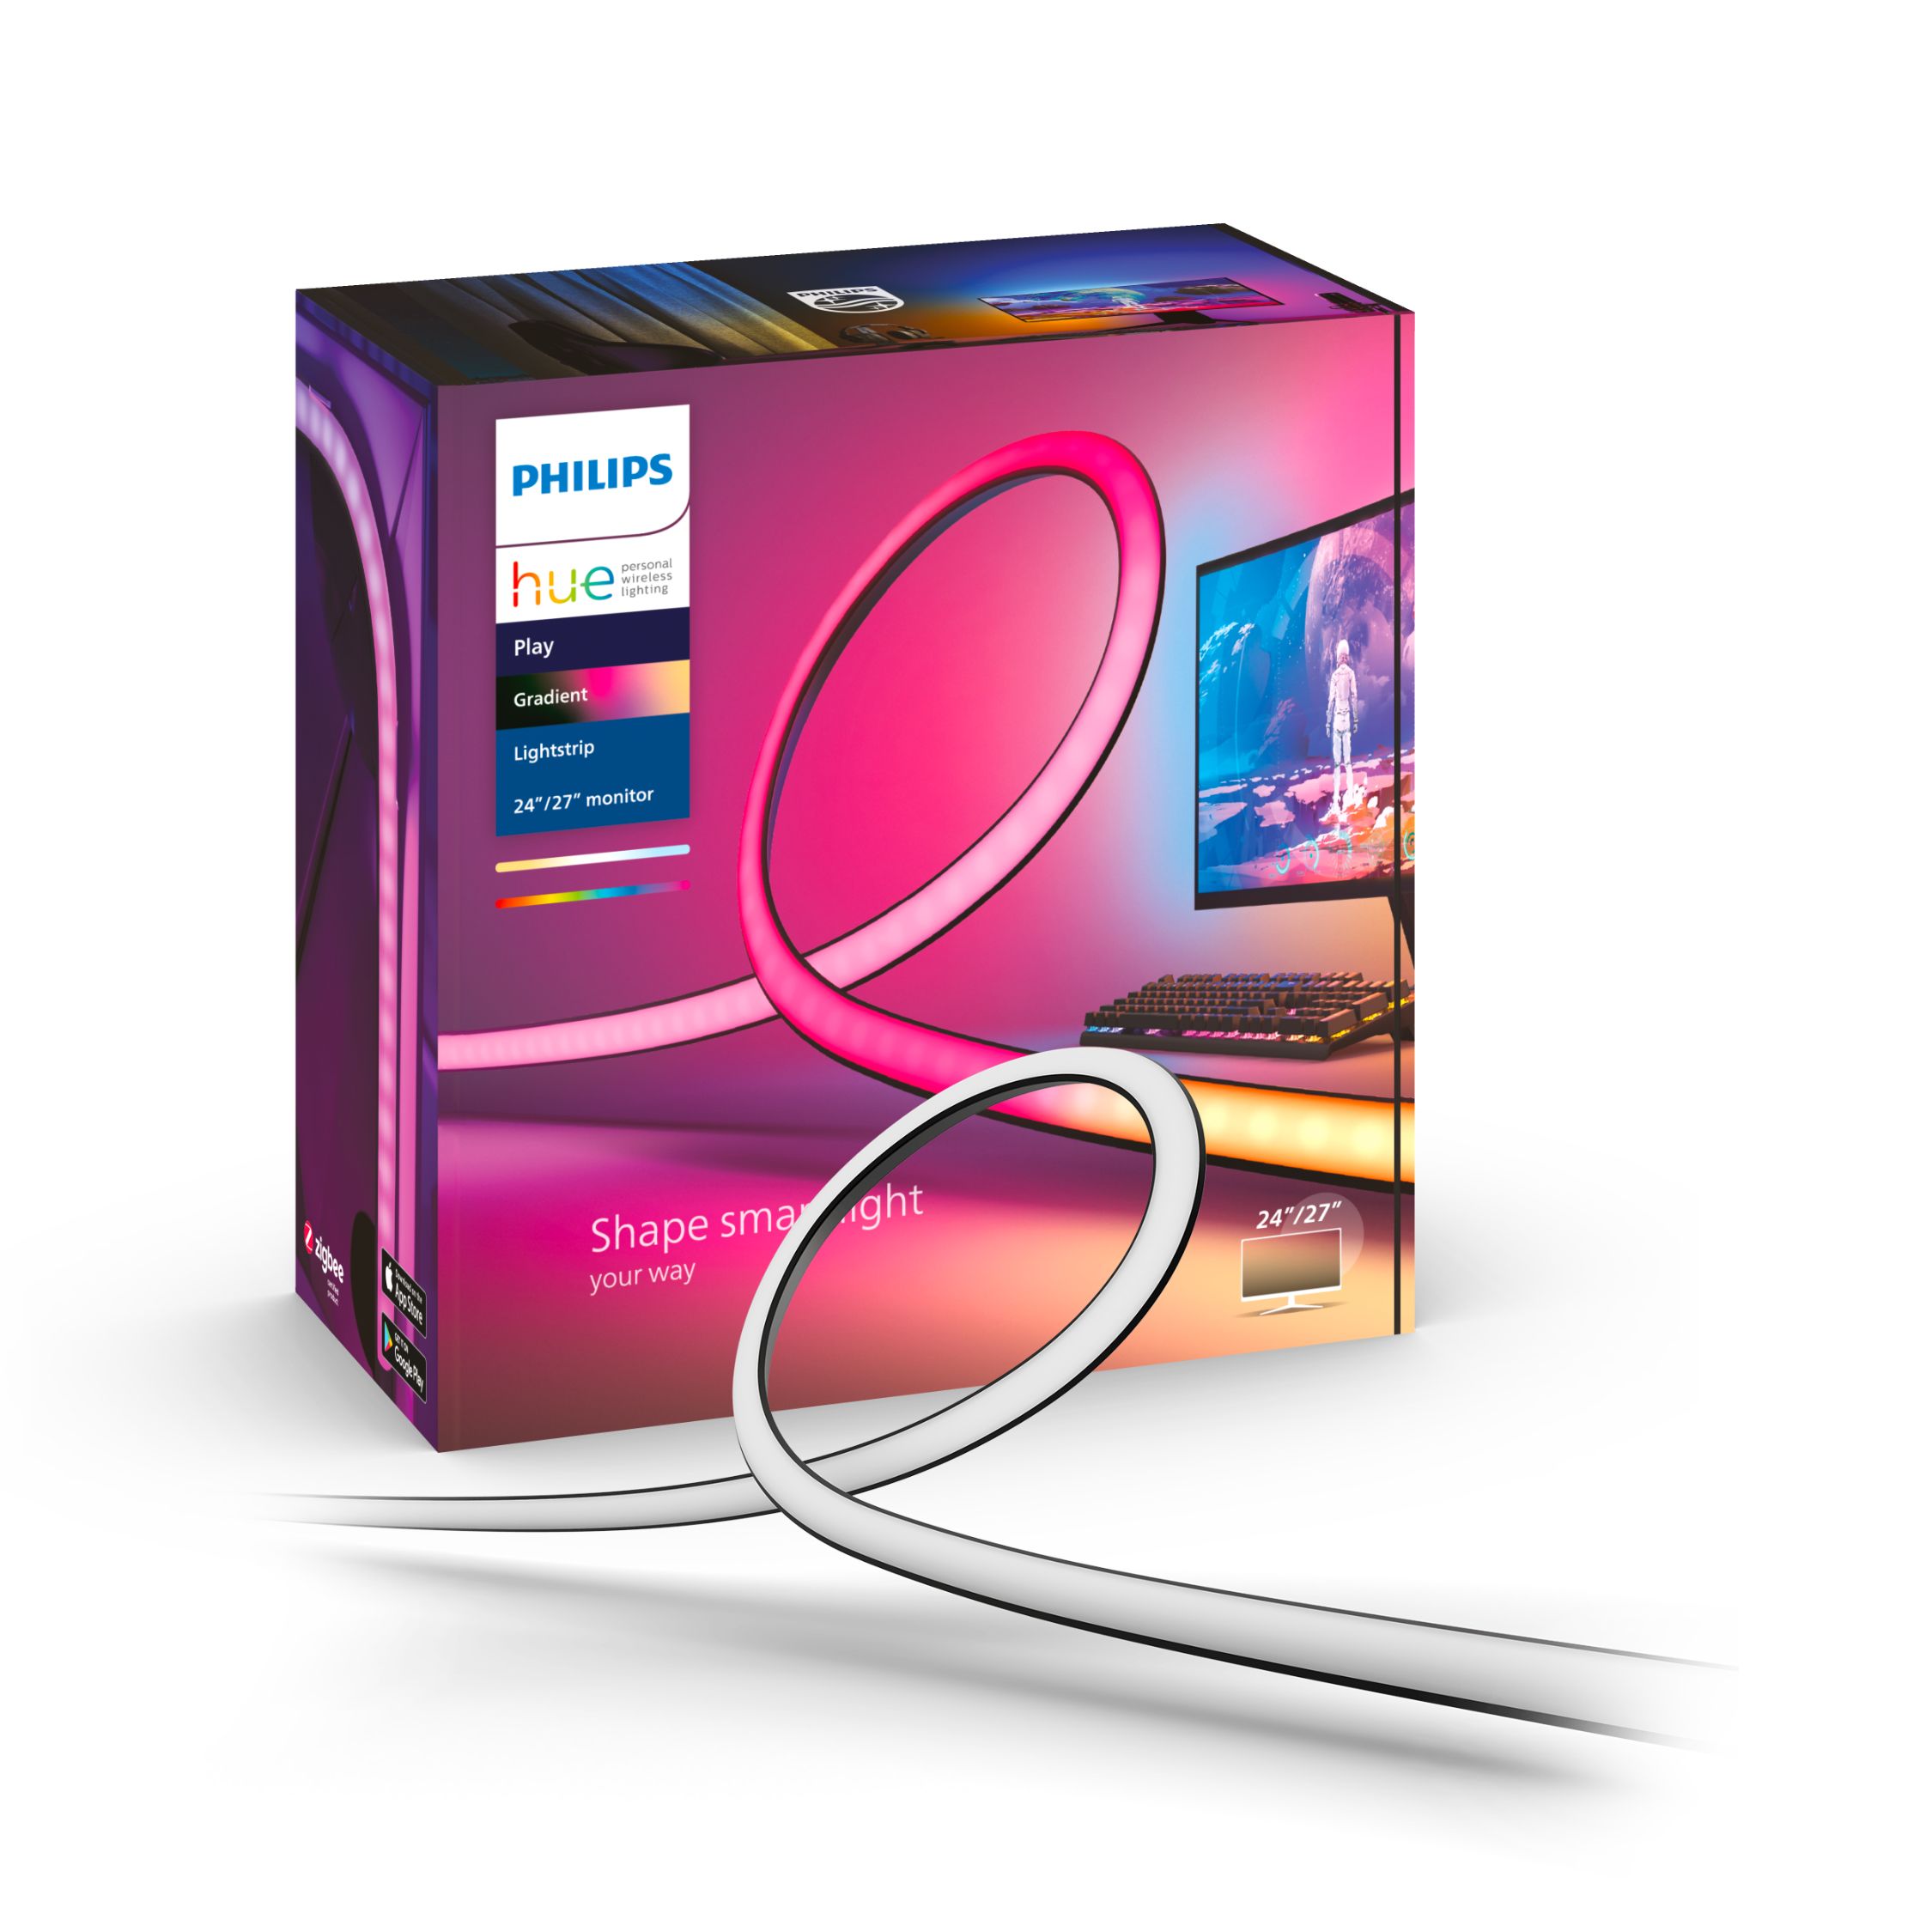 Philips Hue Play gradient Lightstrip for PC - product-1